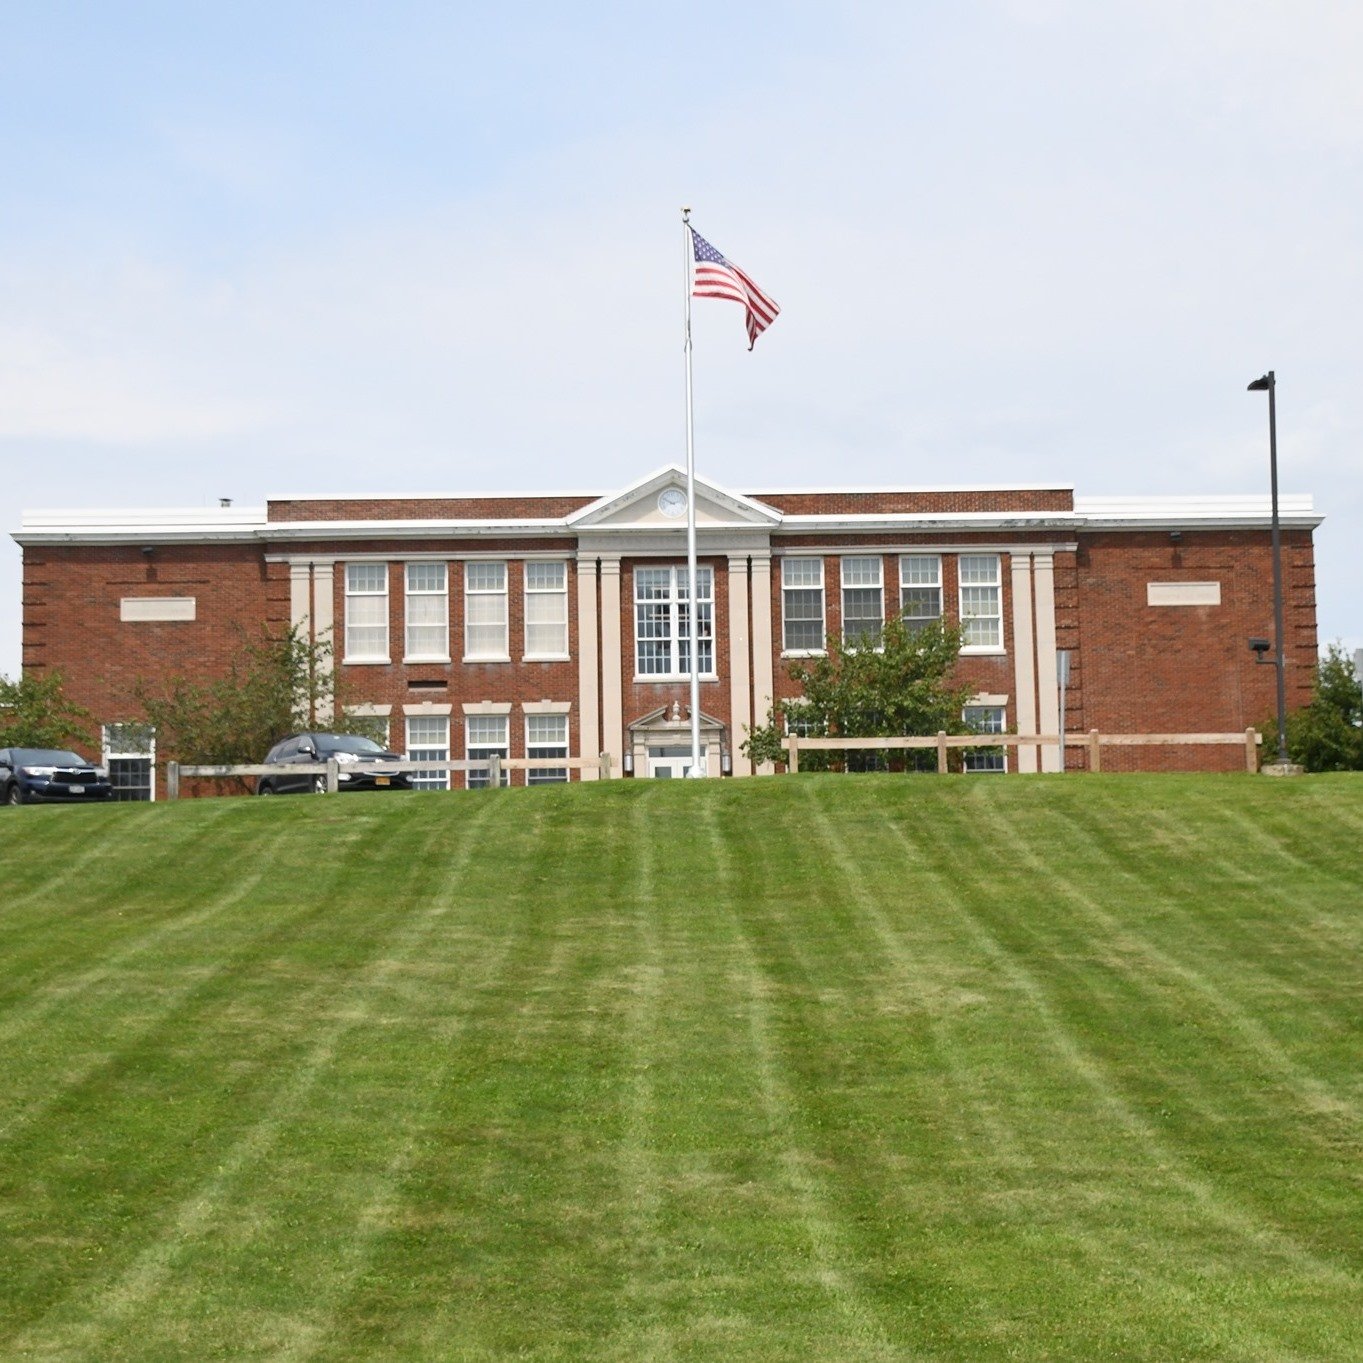 The Madison Central School District is the recipient of a Student Mental Health Support Grant from the New York State Office of Mental Health.